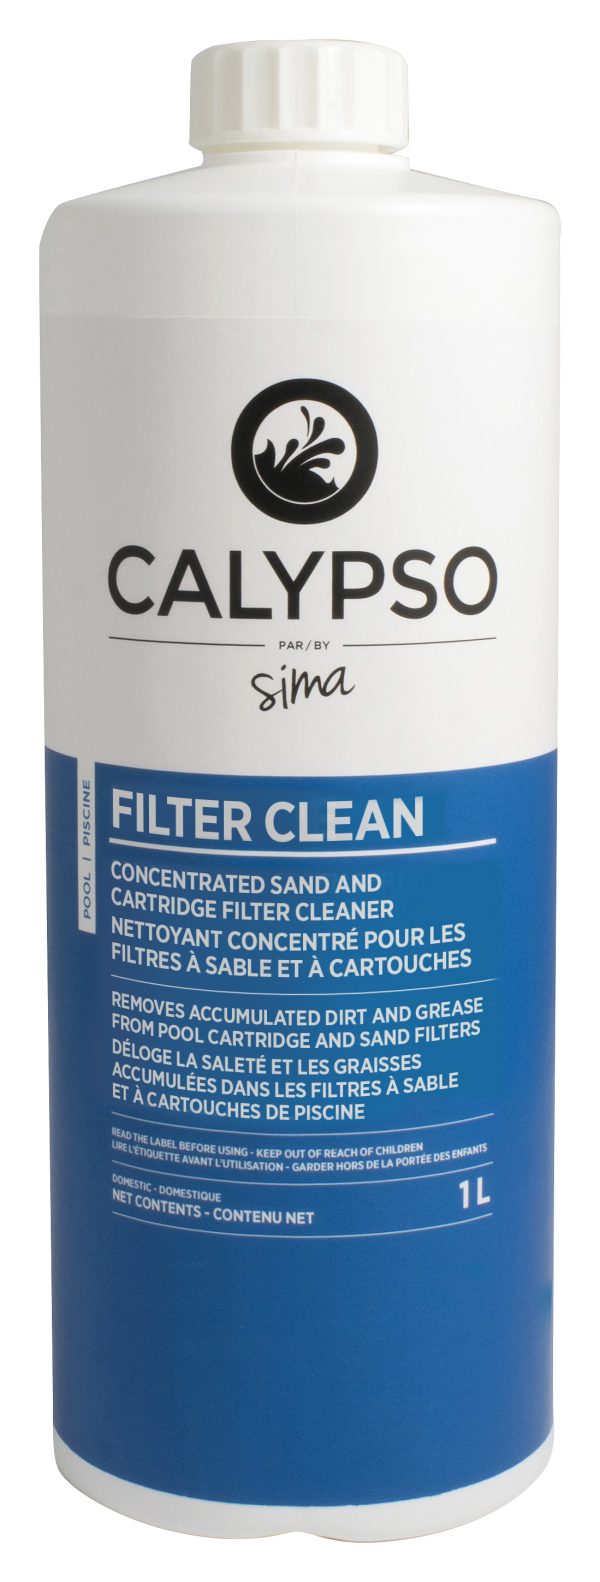 Calypso Filter Clean 1L - pool products - Pool maintenance - Sima POOLS & SPAS